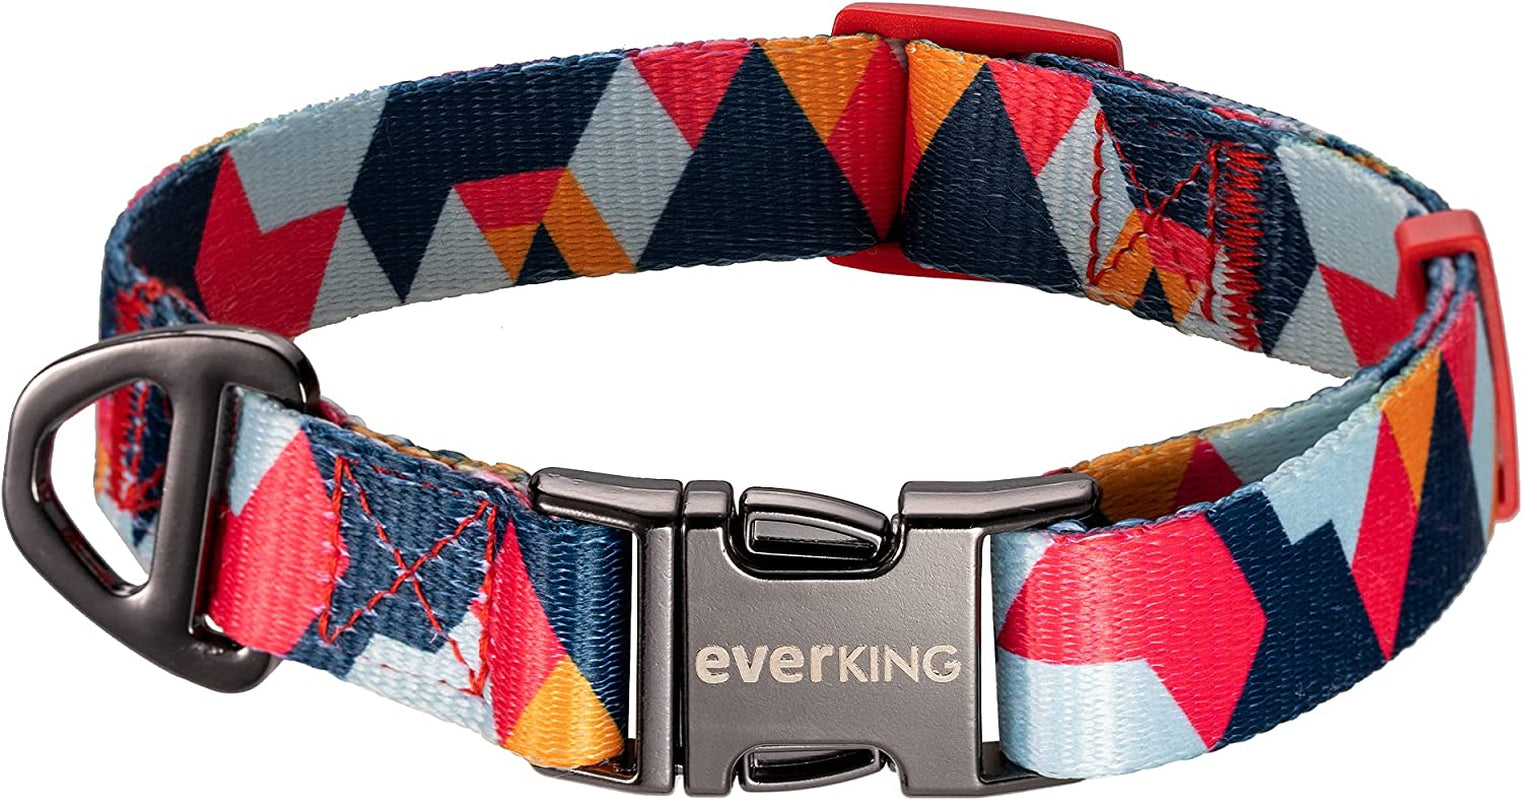 EVERKING Dog Collar Soft Comfortable Poleyster with Safety Locking Buckle Adjustable for Small Medium Large Dogs and Cats Geometry Pattern for Outdoor Traning Walking Running Camping (Volcano, M) Electronics > GPS Accessories > GPS Cases EVERKING Volcano XS- Width 2/5” x (7”-11”) 